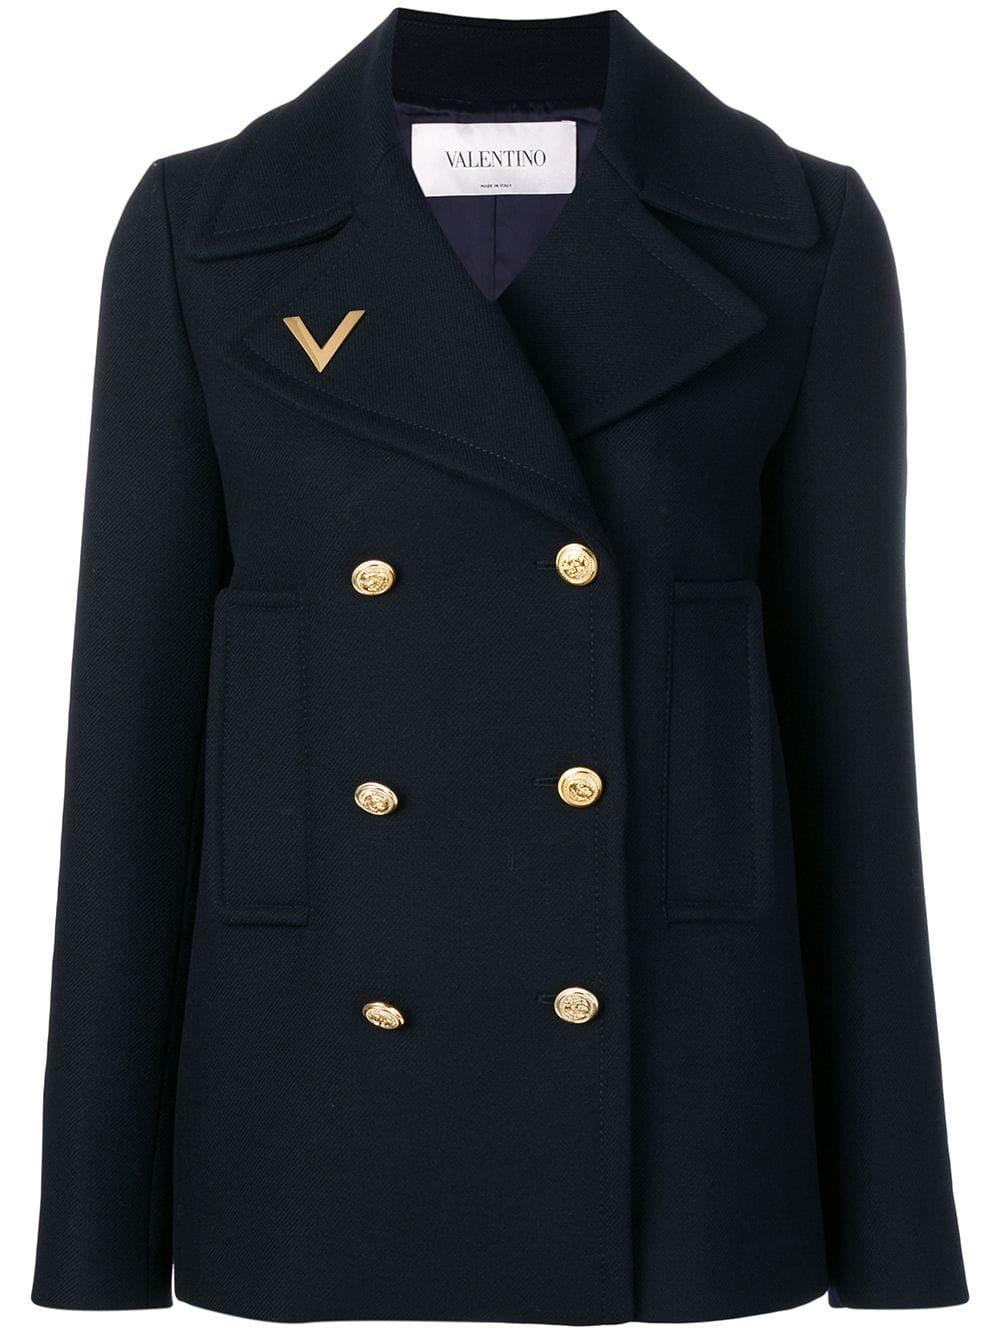 Valentino Wool Logo Embroidered Peacoat in Navy (Blue) - Lyst